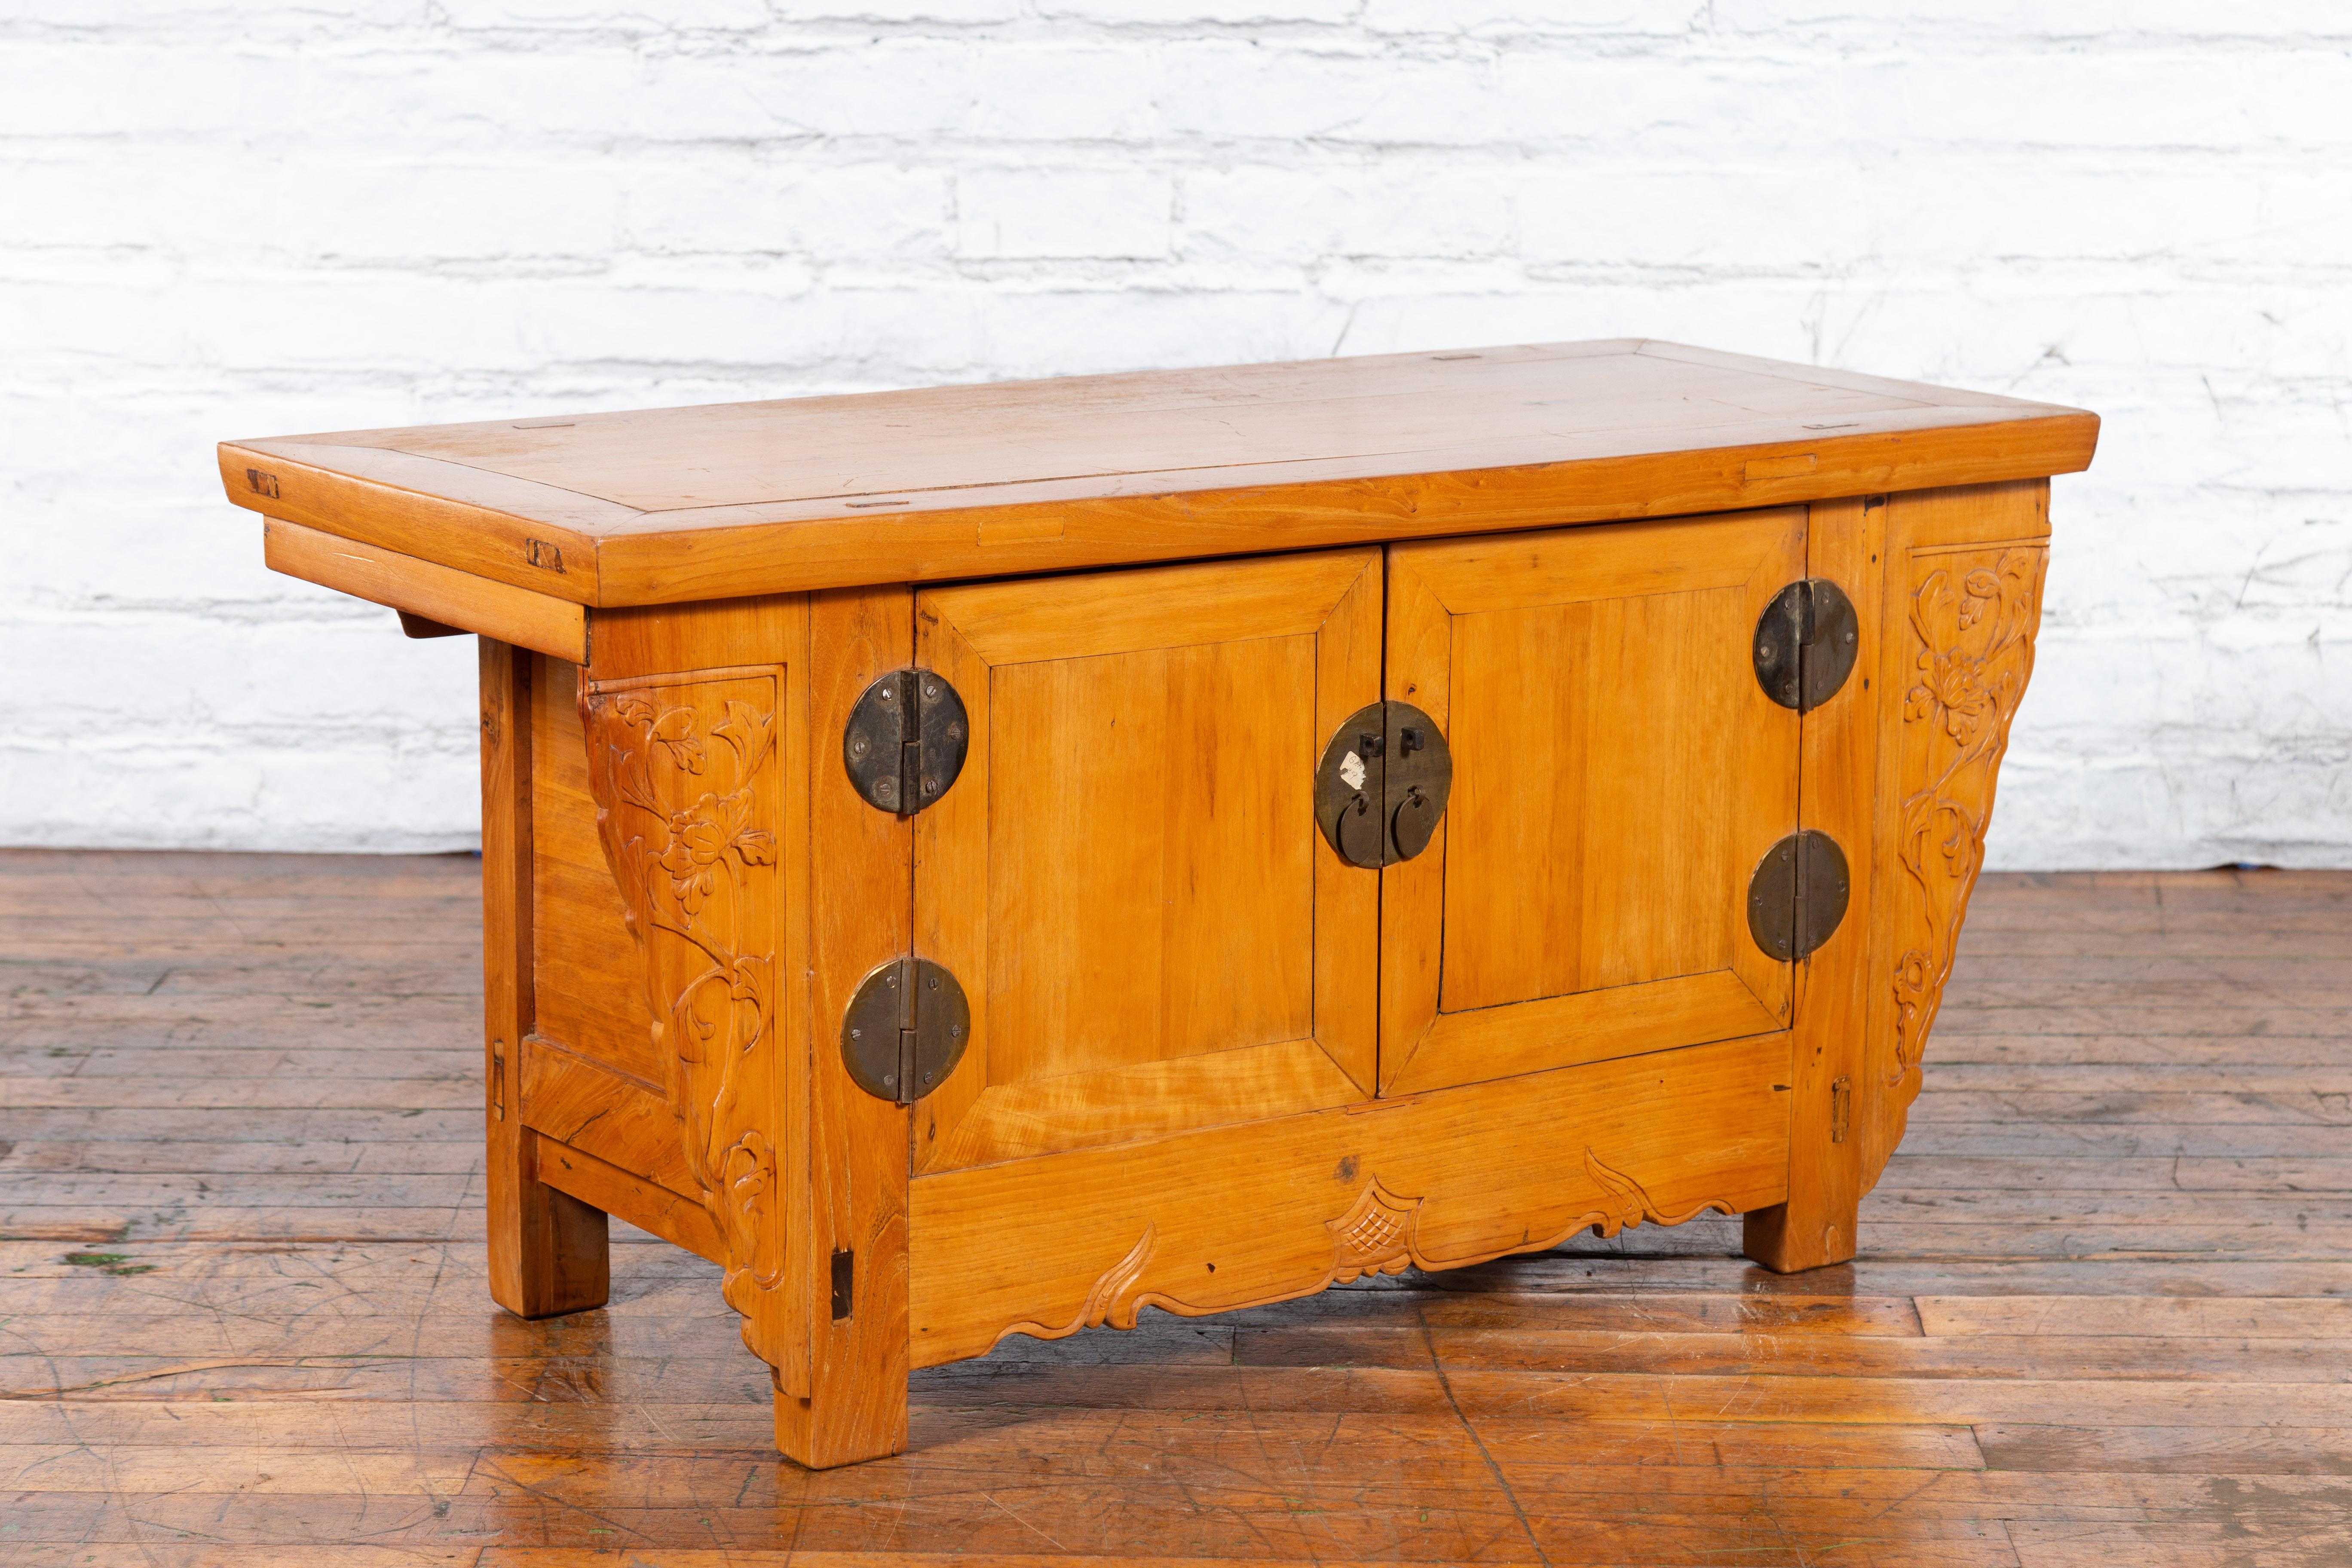 20th Century Chinese Antique Elm Wood Sideboard with Carved Spandrels and Bronze Hardware For Sale